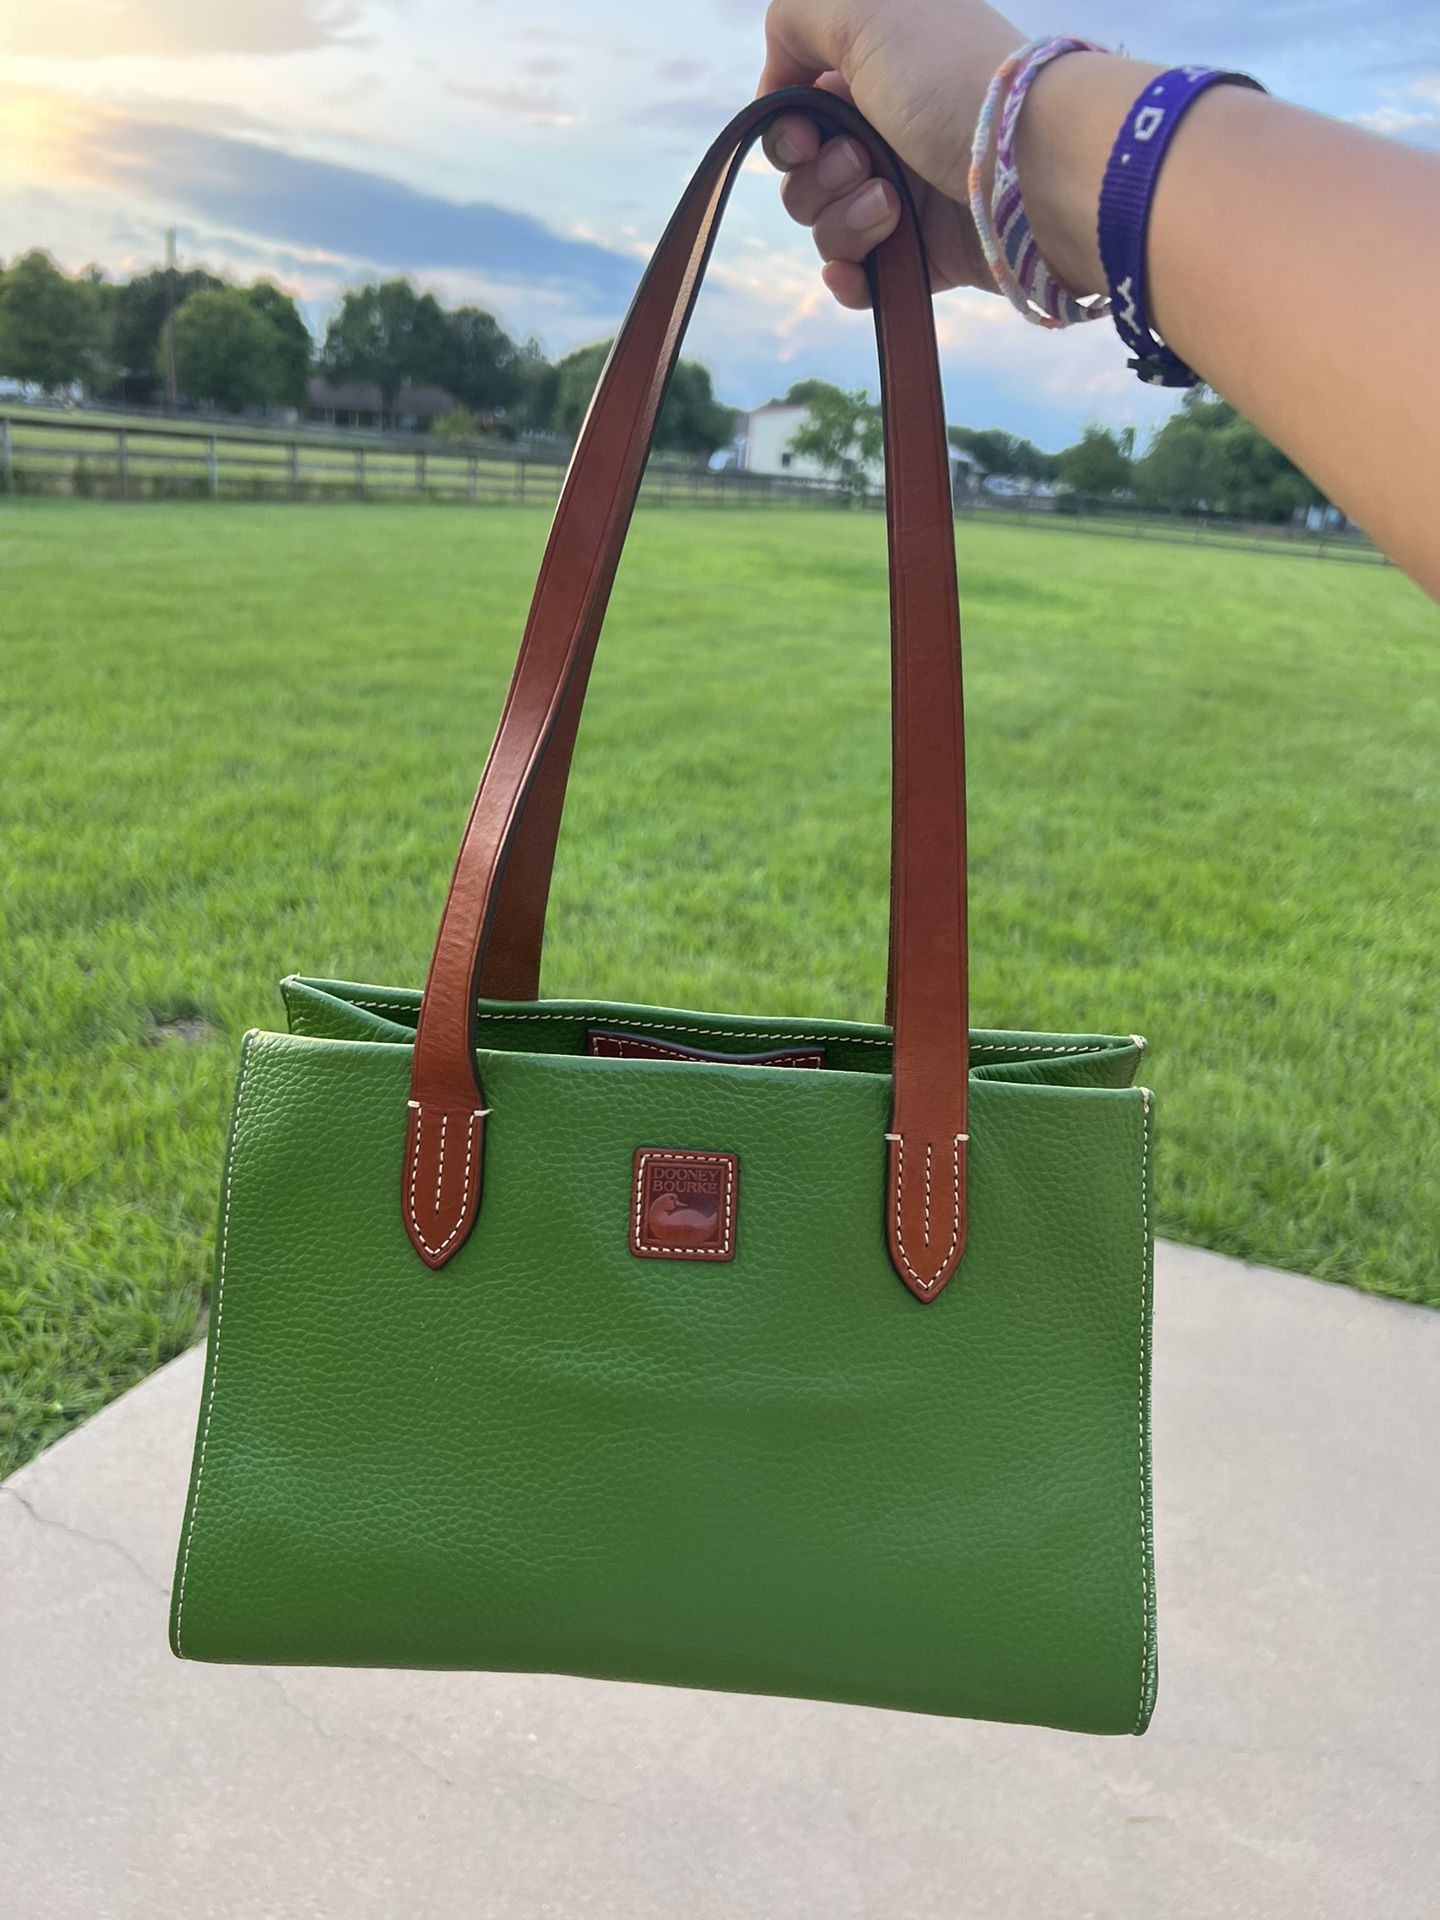 Louis Vuitton Purse for Sale in Cypress, TX - OfferUp